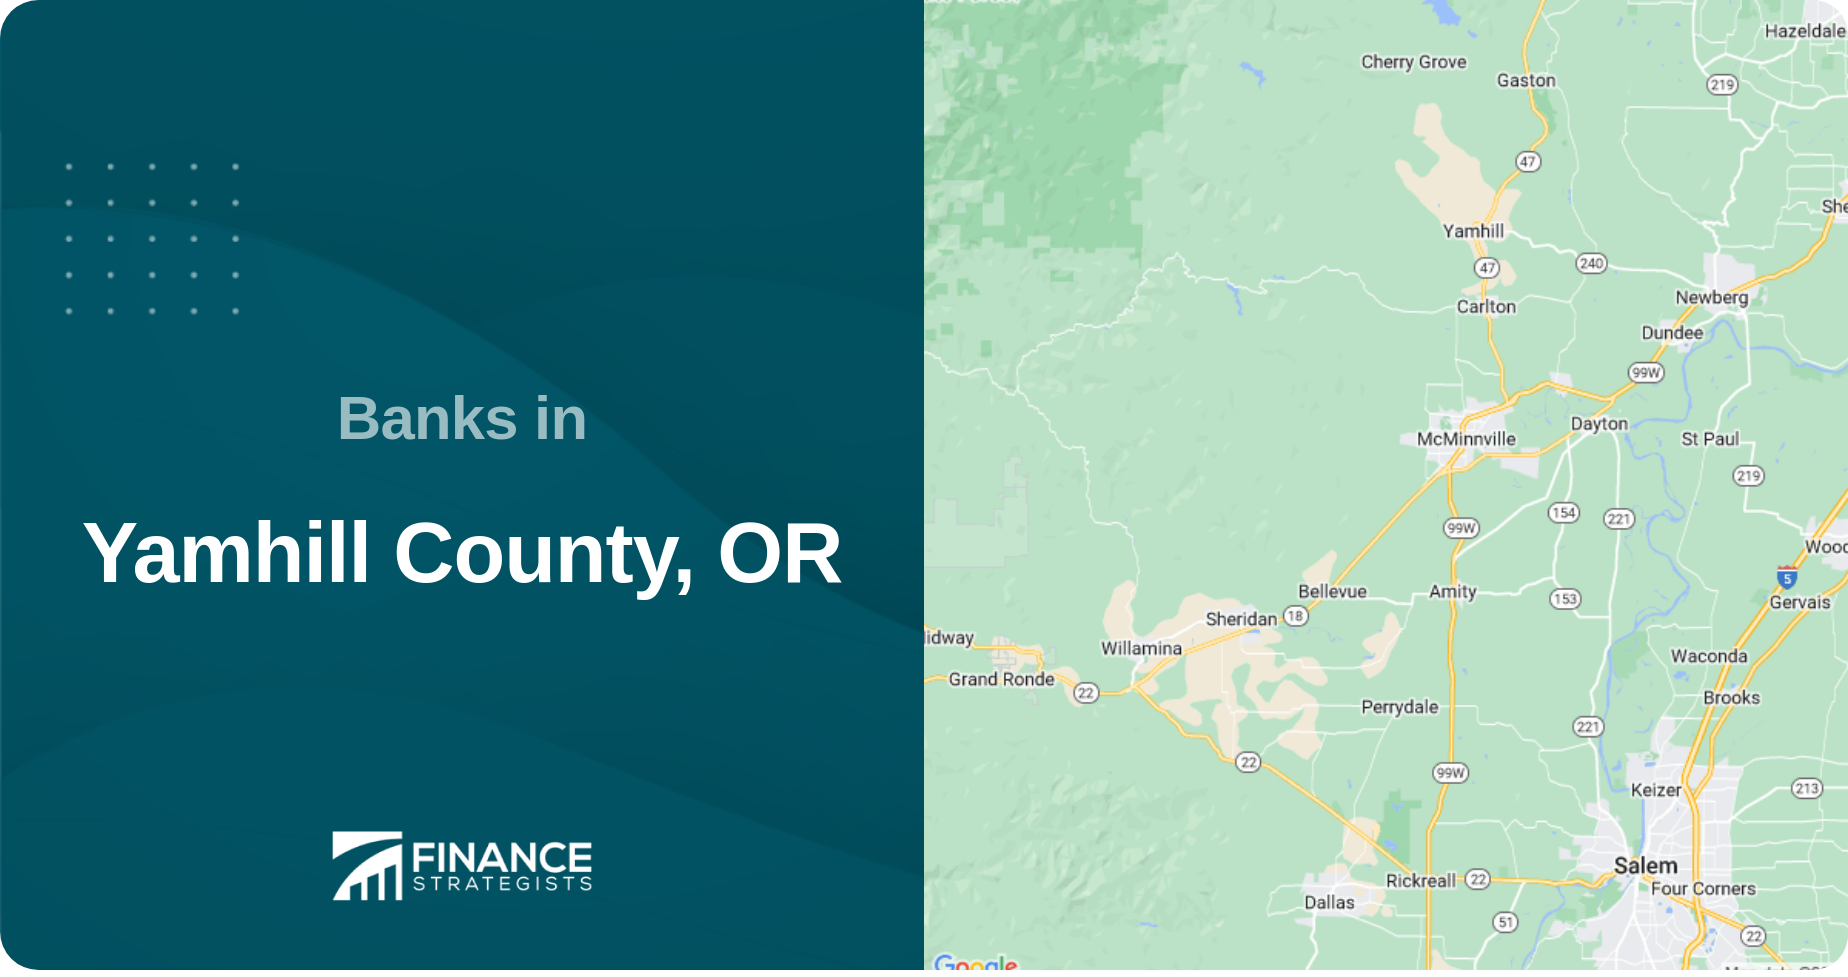 Banks in Yamhill County, OR